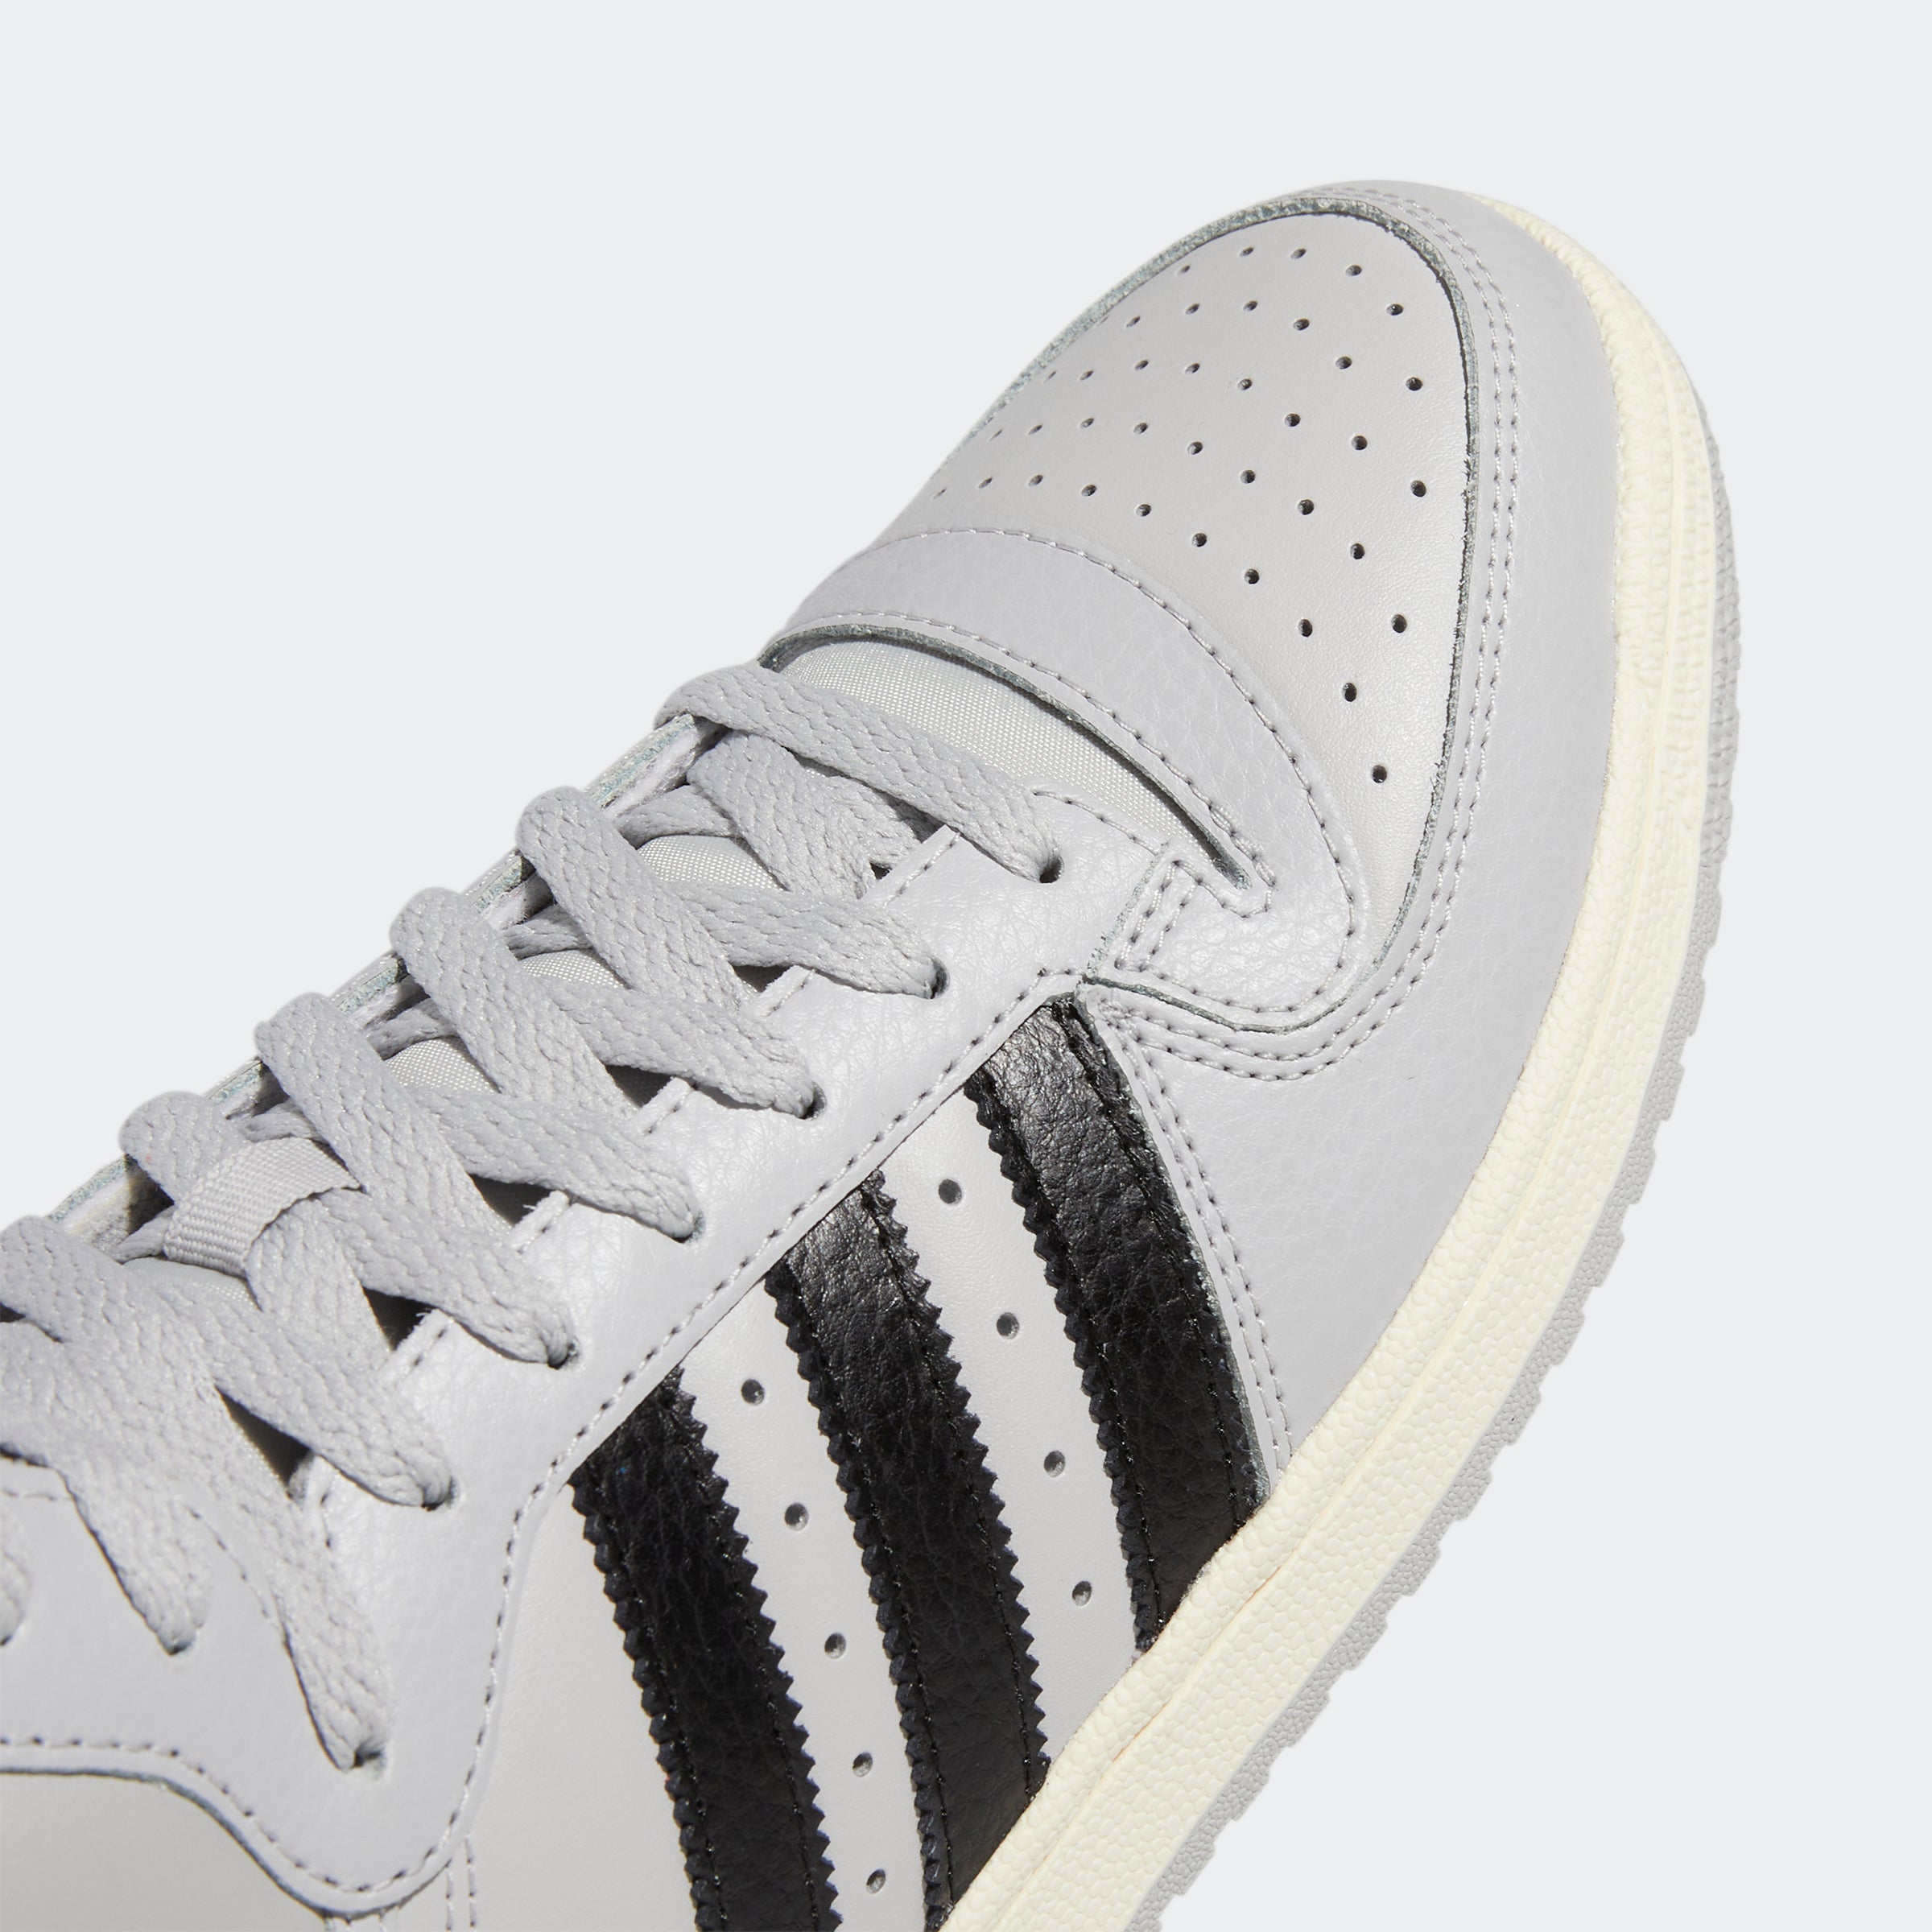 adidas Top Ten Low RB Shoes